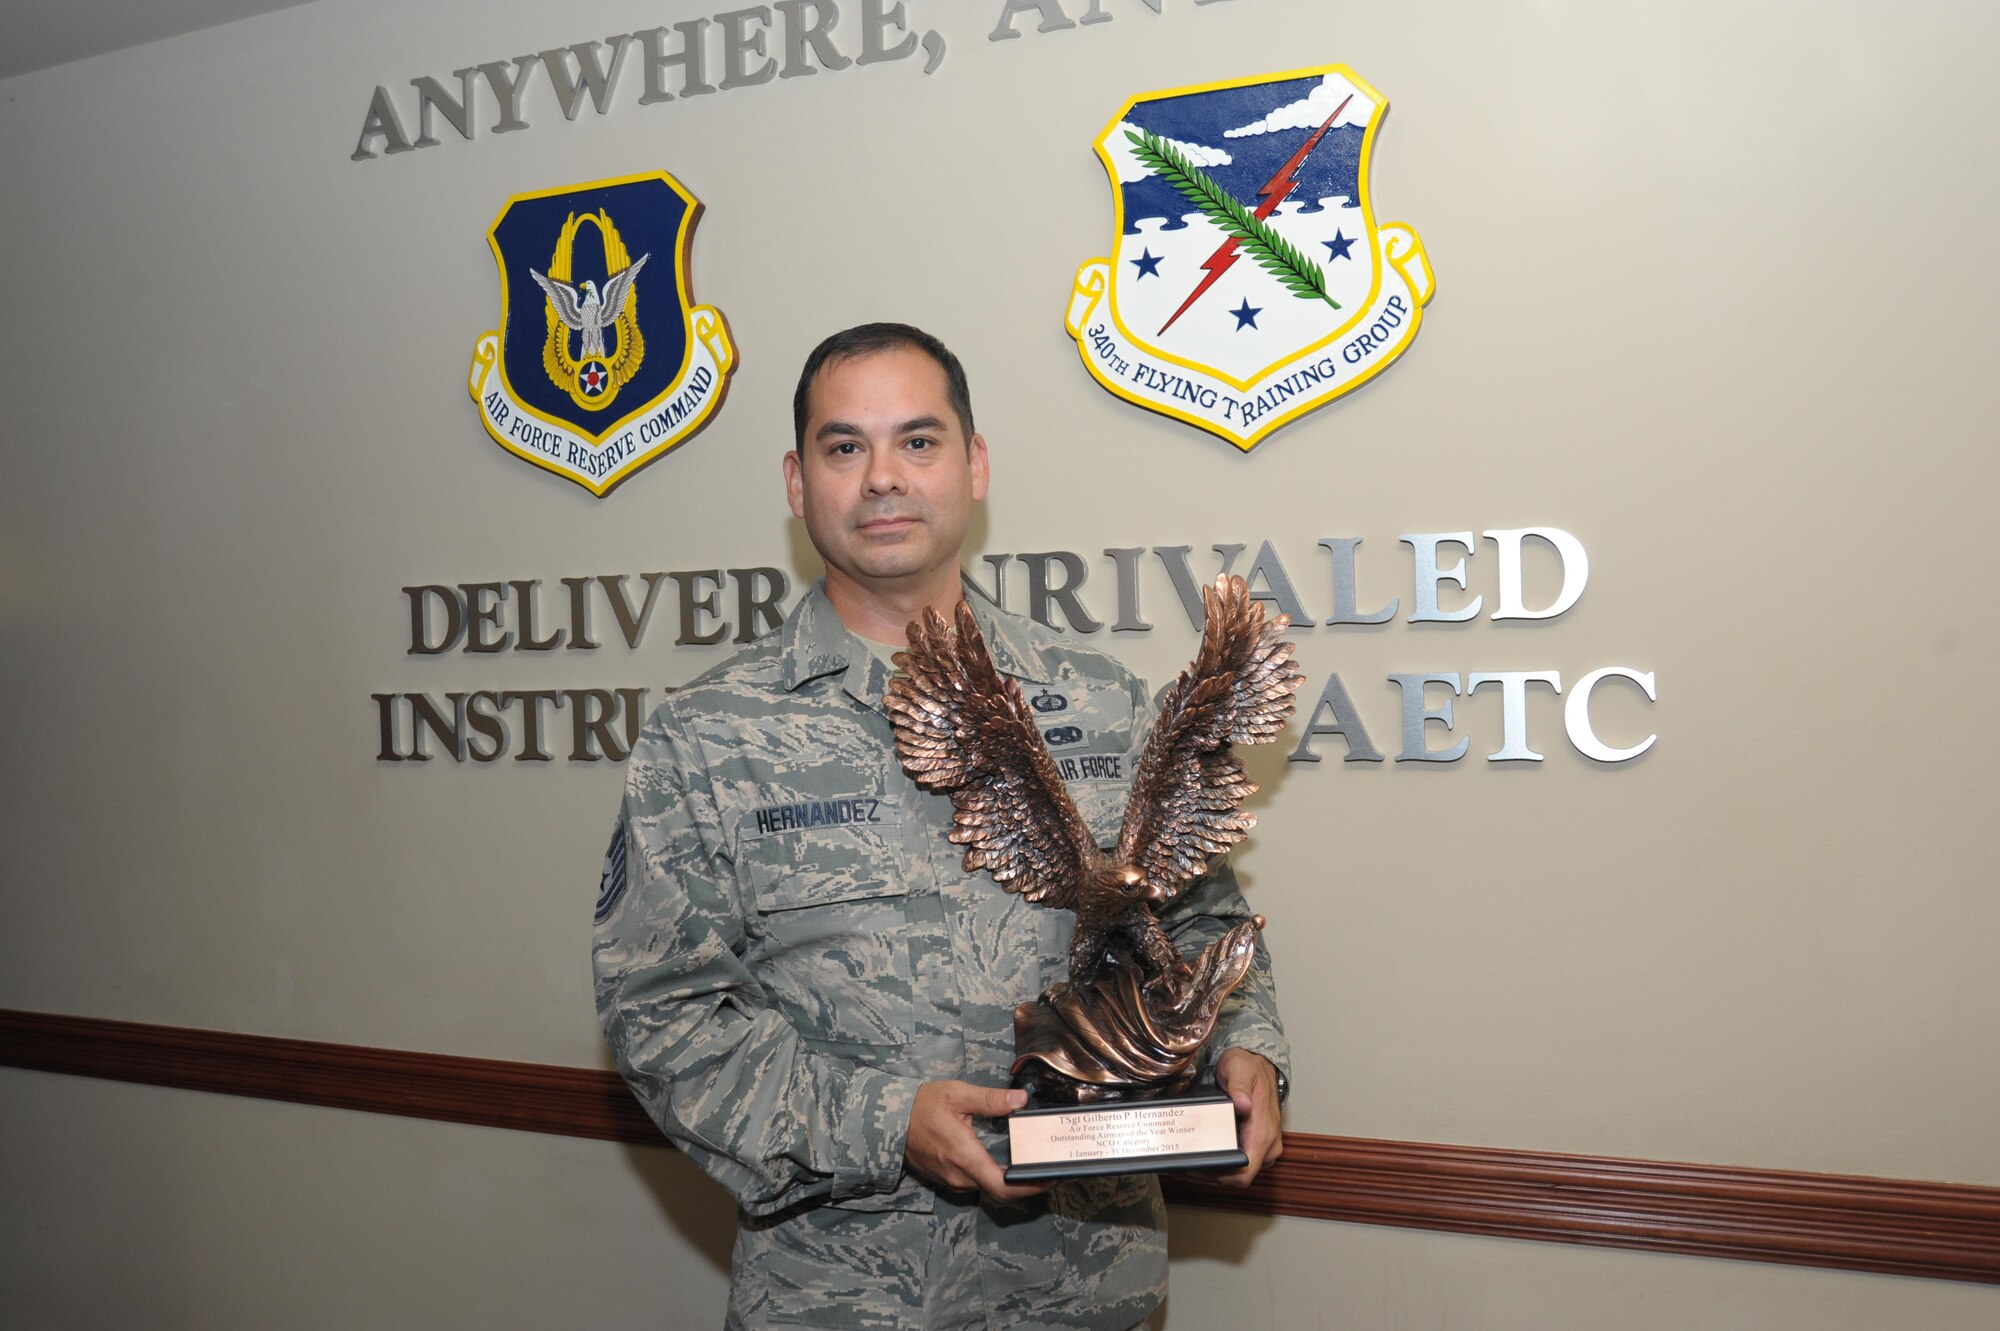 Technical Sergeant Gilberto Hernandez, 340th Flying Training Group, non-commissioned officer of the year, poses with his award June 15, at Joint Base San Antonio-Randolph. Hernandez led the processing of more than 25,000 military pay transactions with a 98.6 percent accuracy rate in 2015.